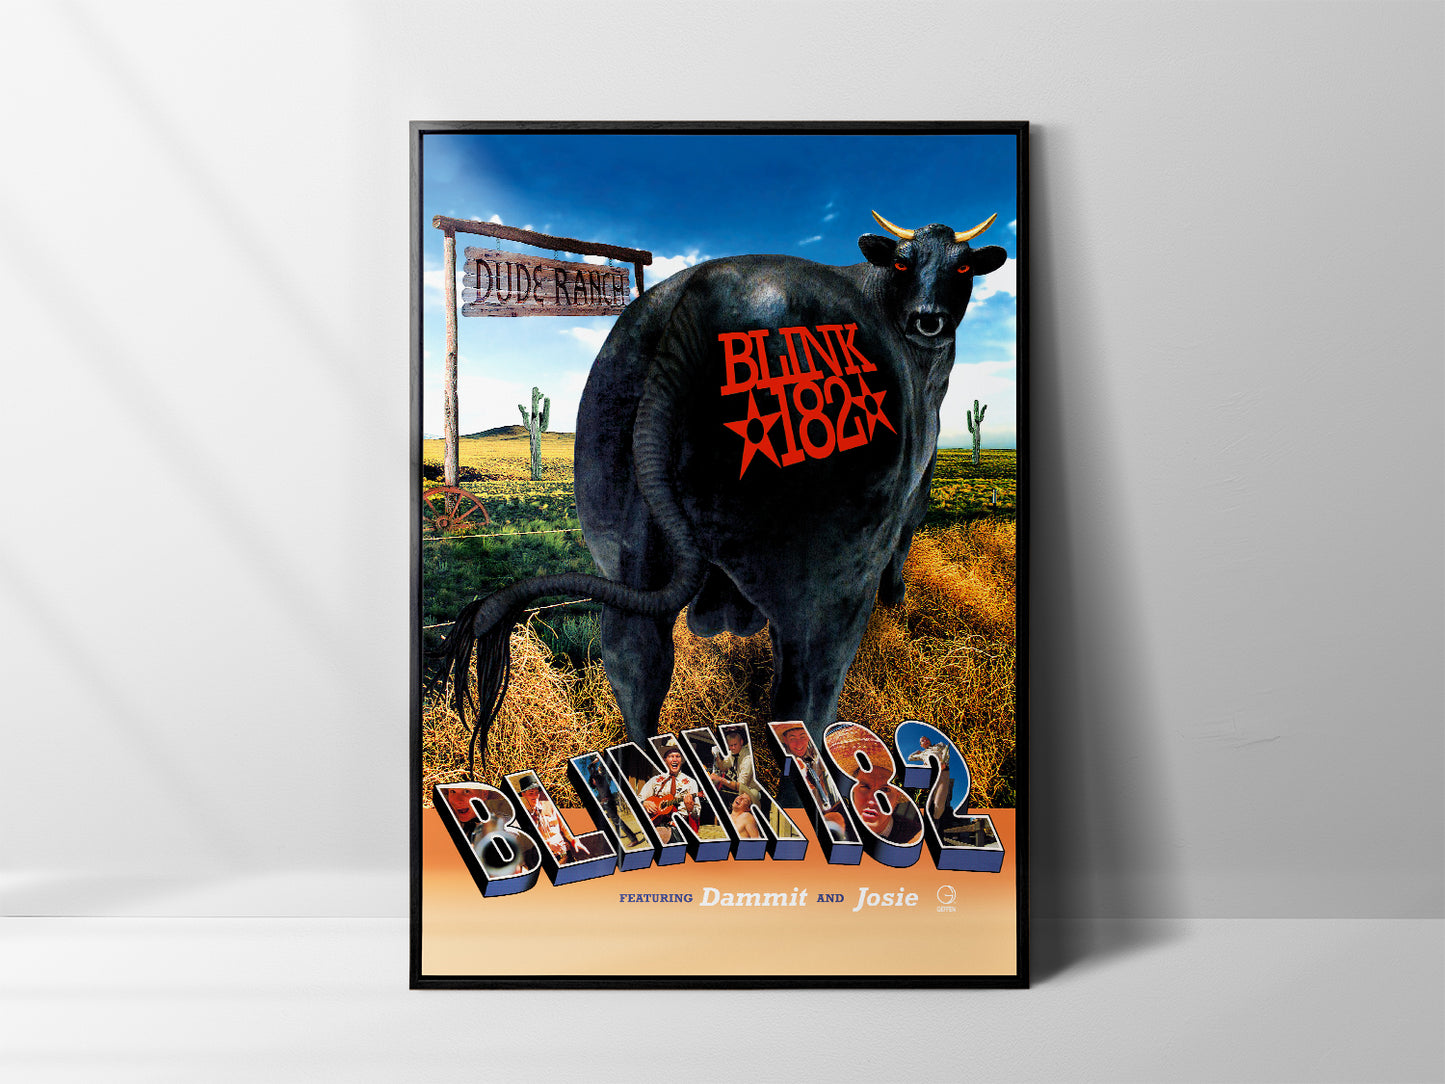 blink182 'Dude Ranch' Poster